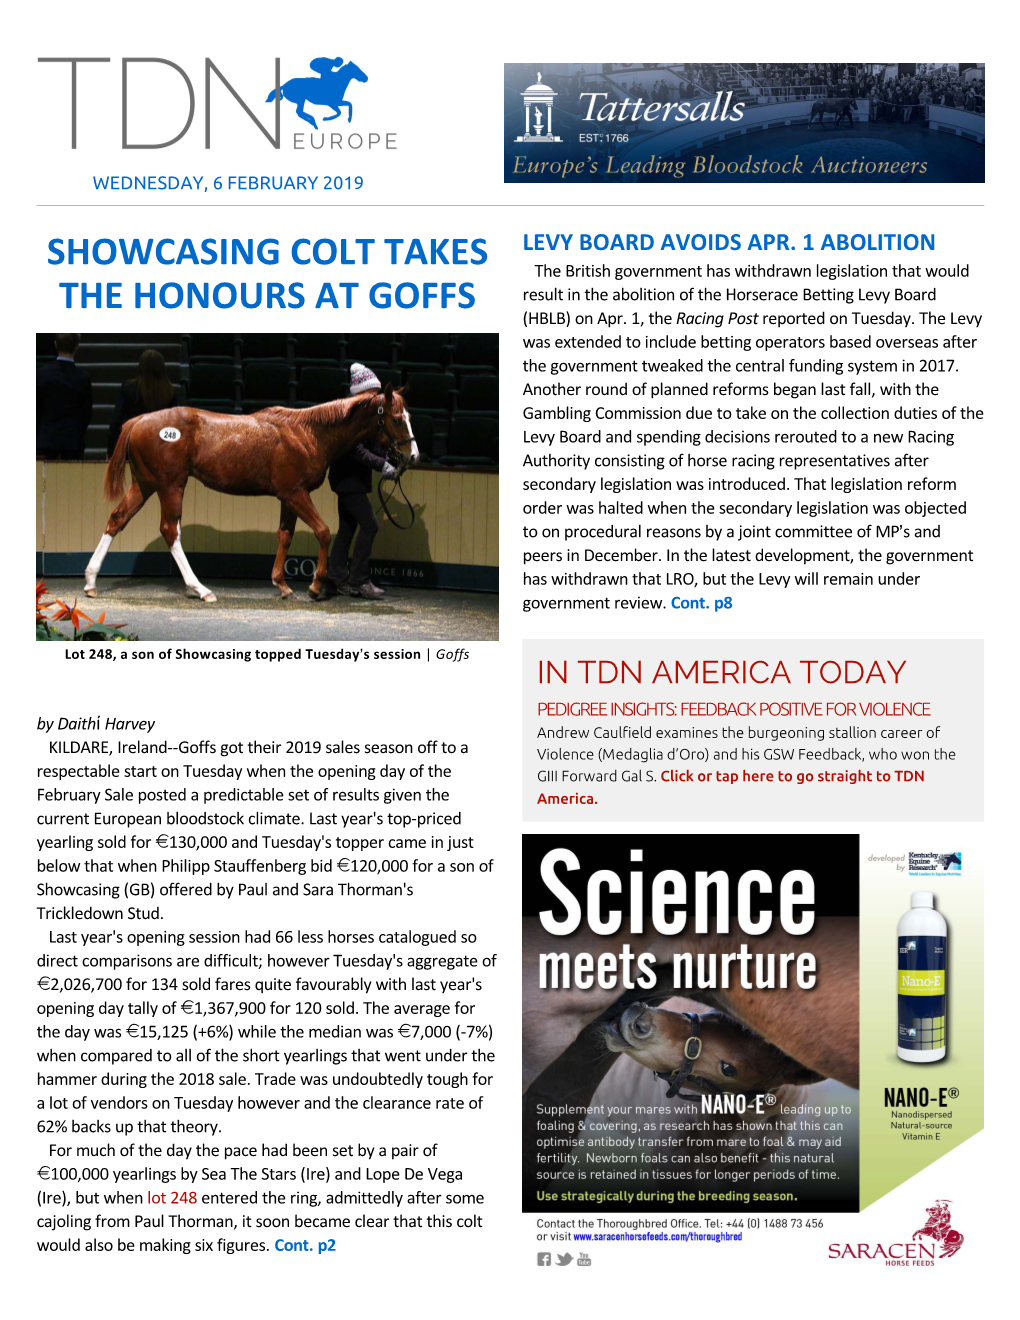 Showcasing Colt Takes the Honours at Goffs